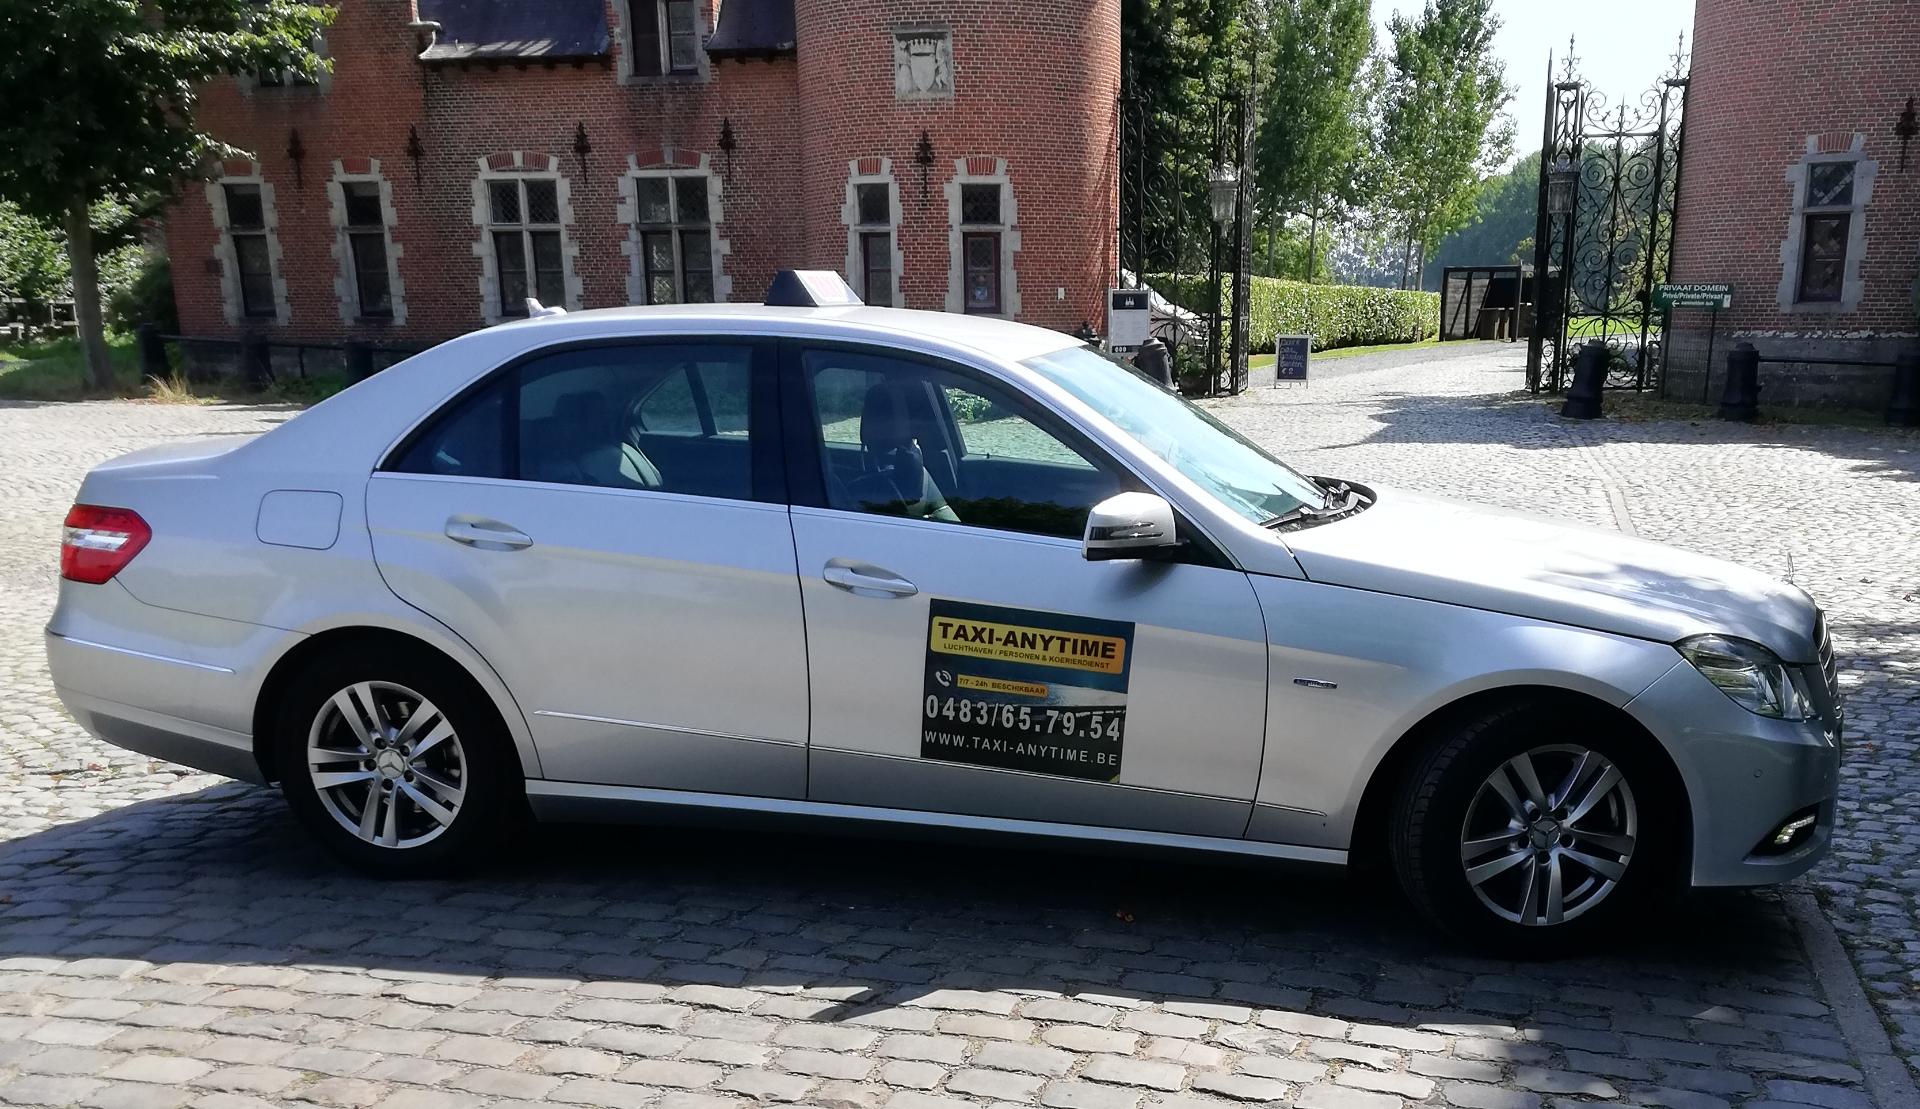 autoverhuur Brecht Taxi Anytime